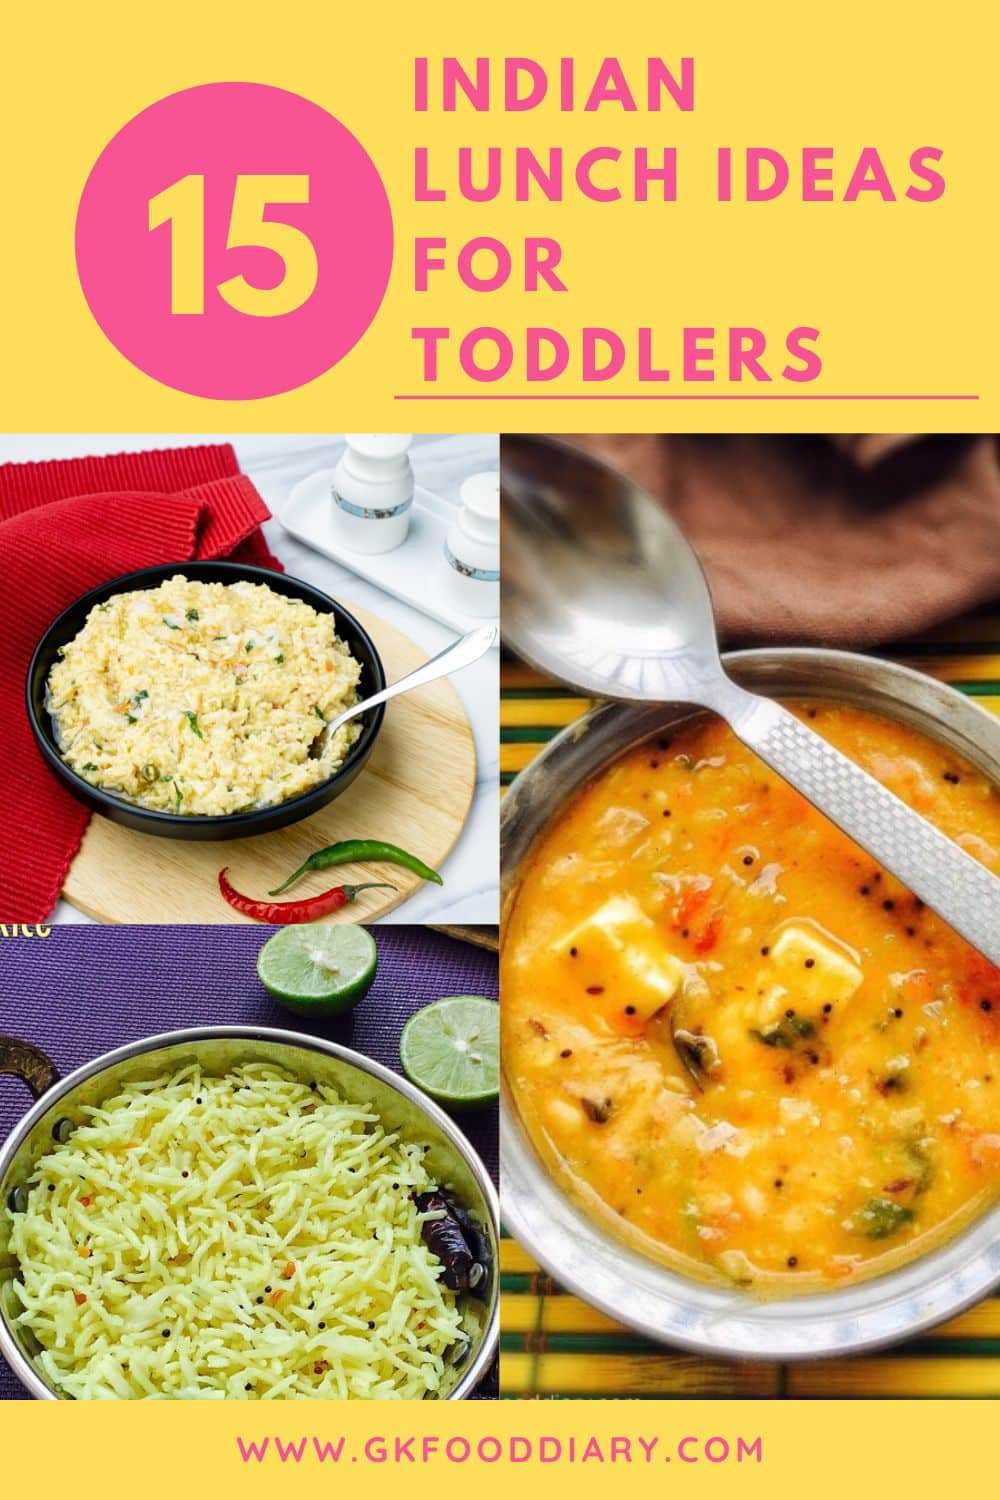 15 Indian Lunch ideas for Toddlers